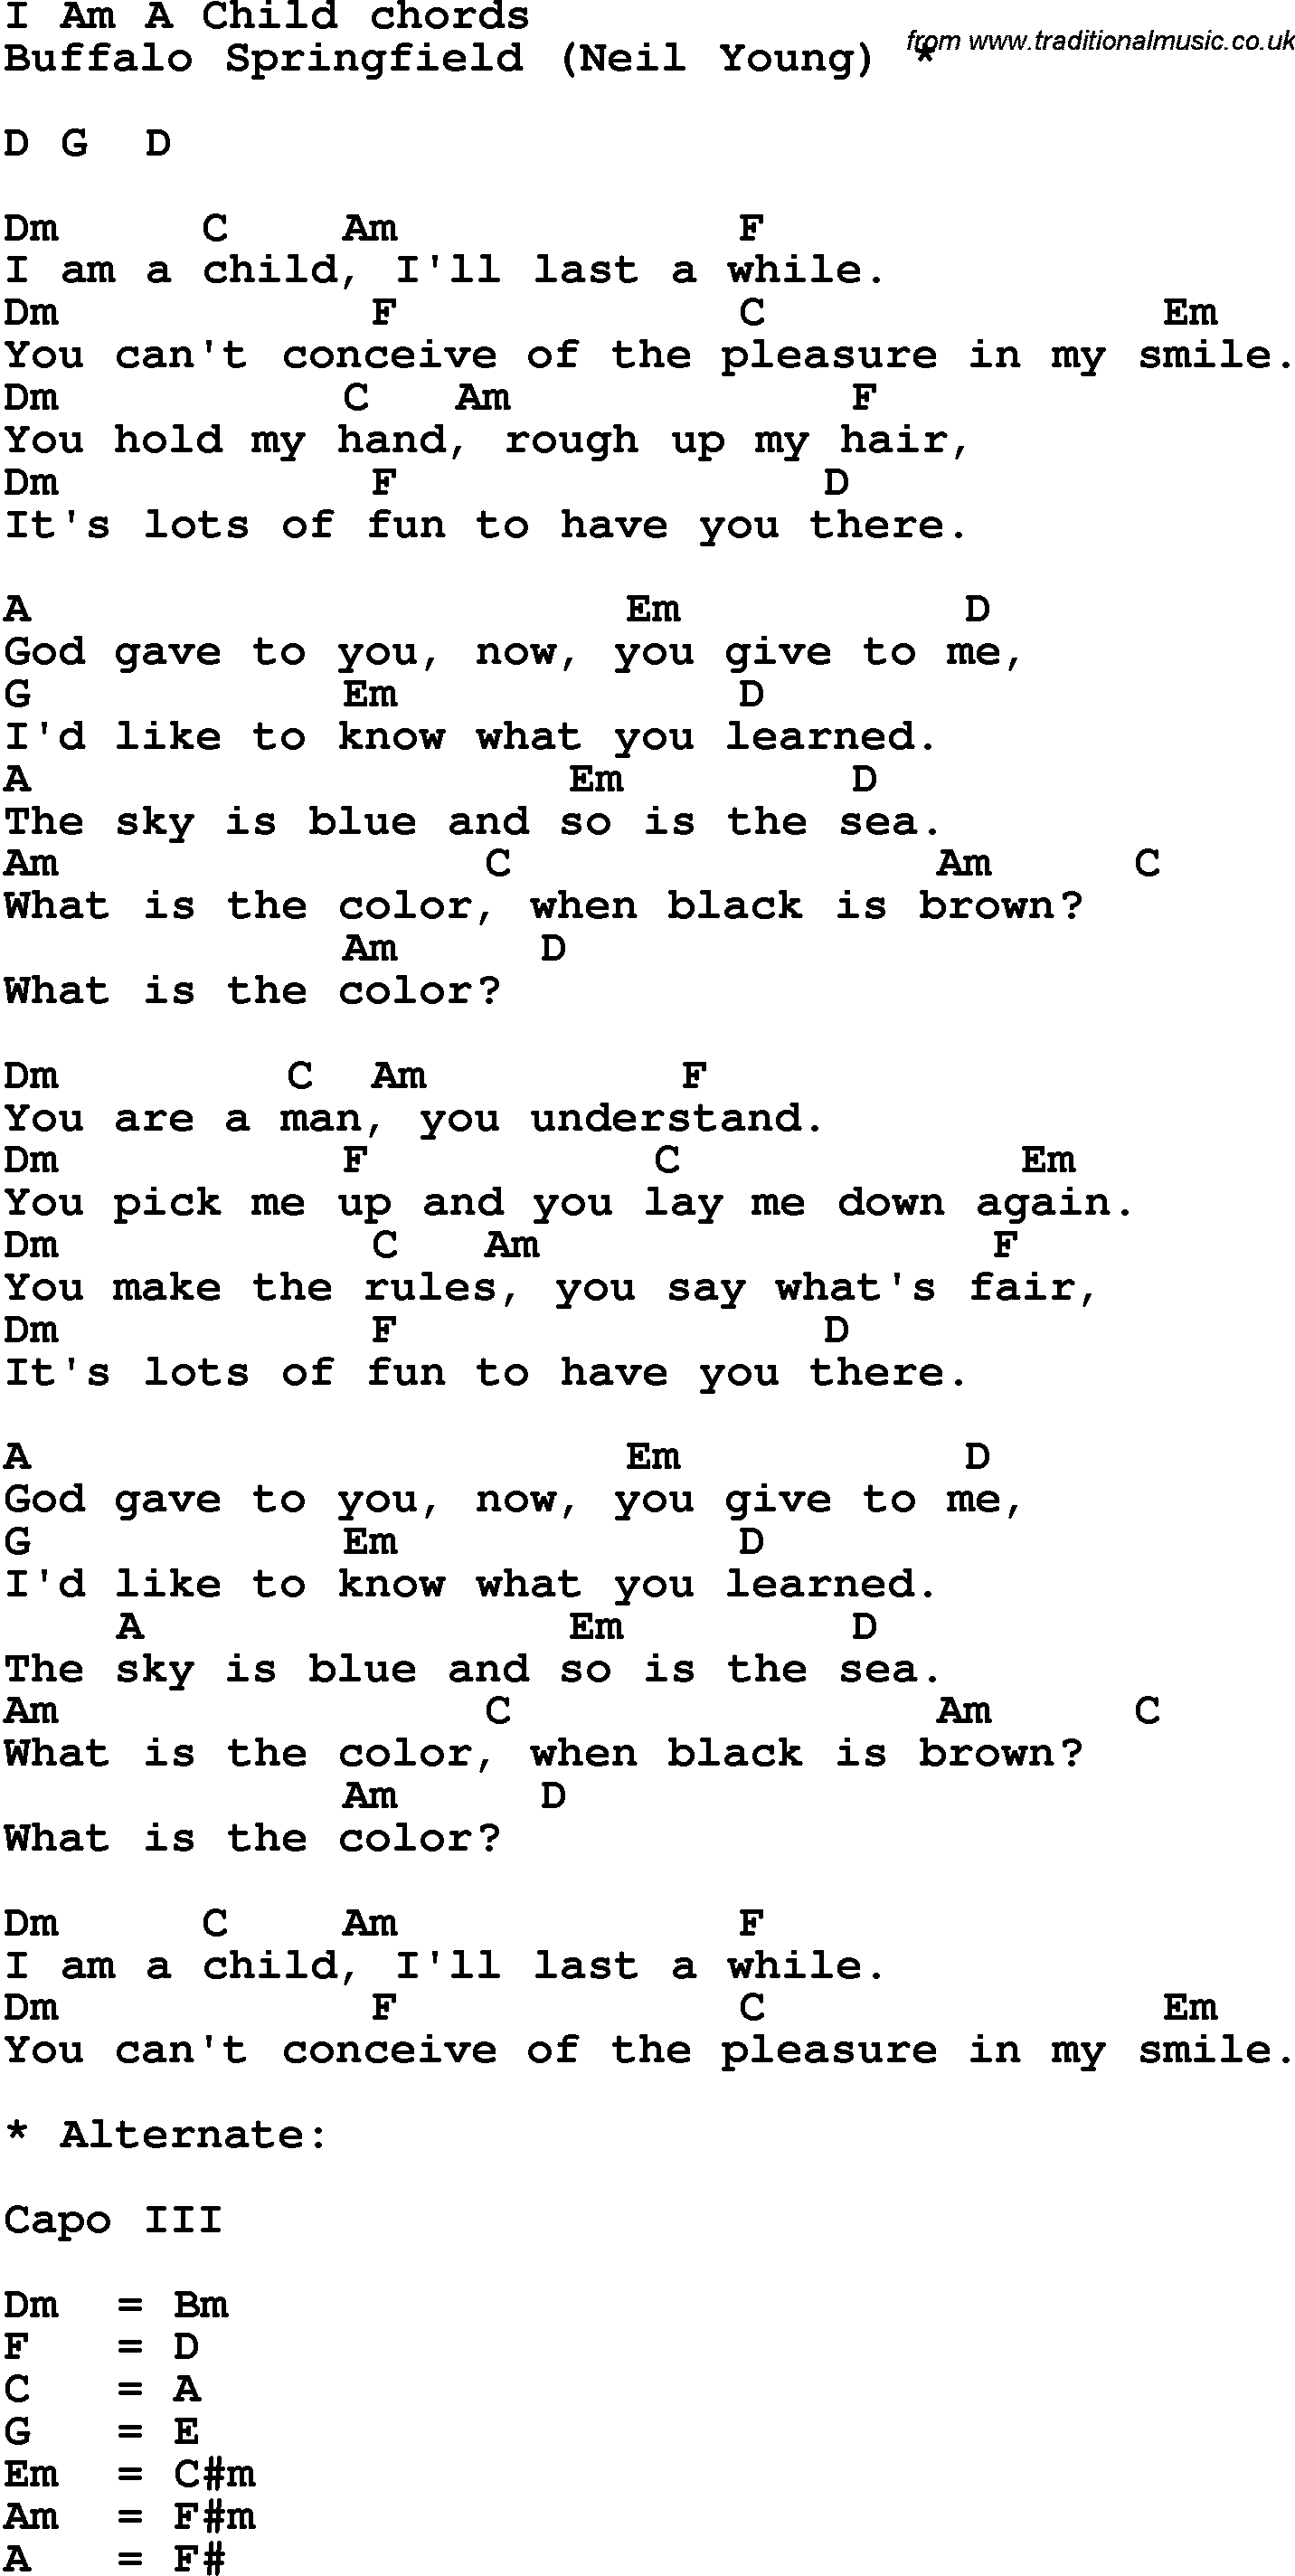 Song Lyrics with guitar chords for I Am A Child